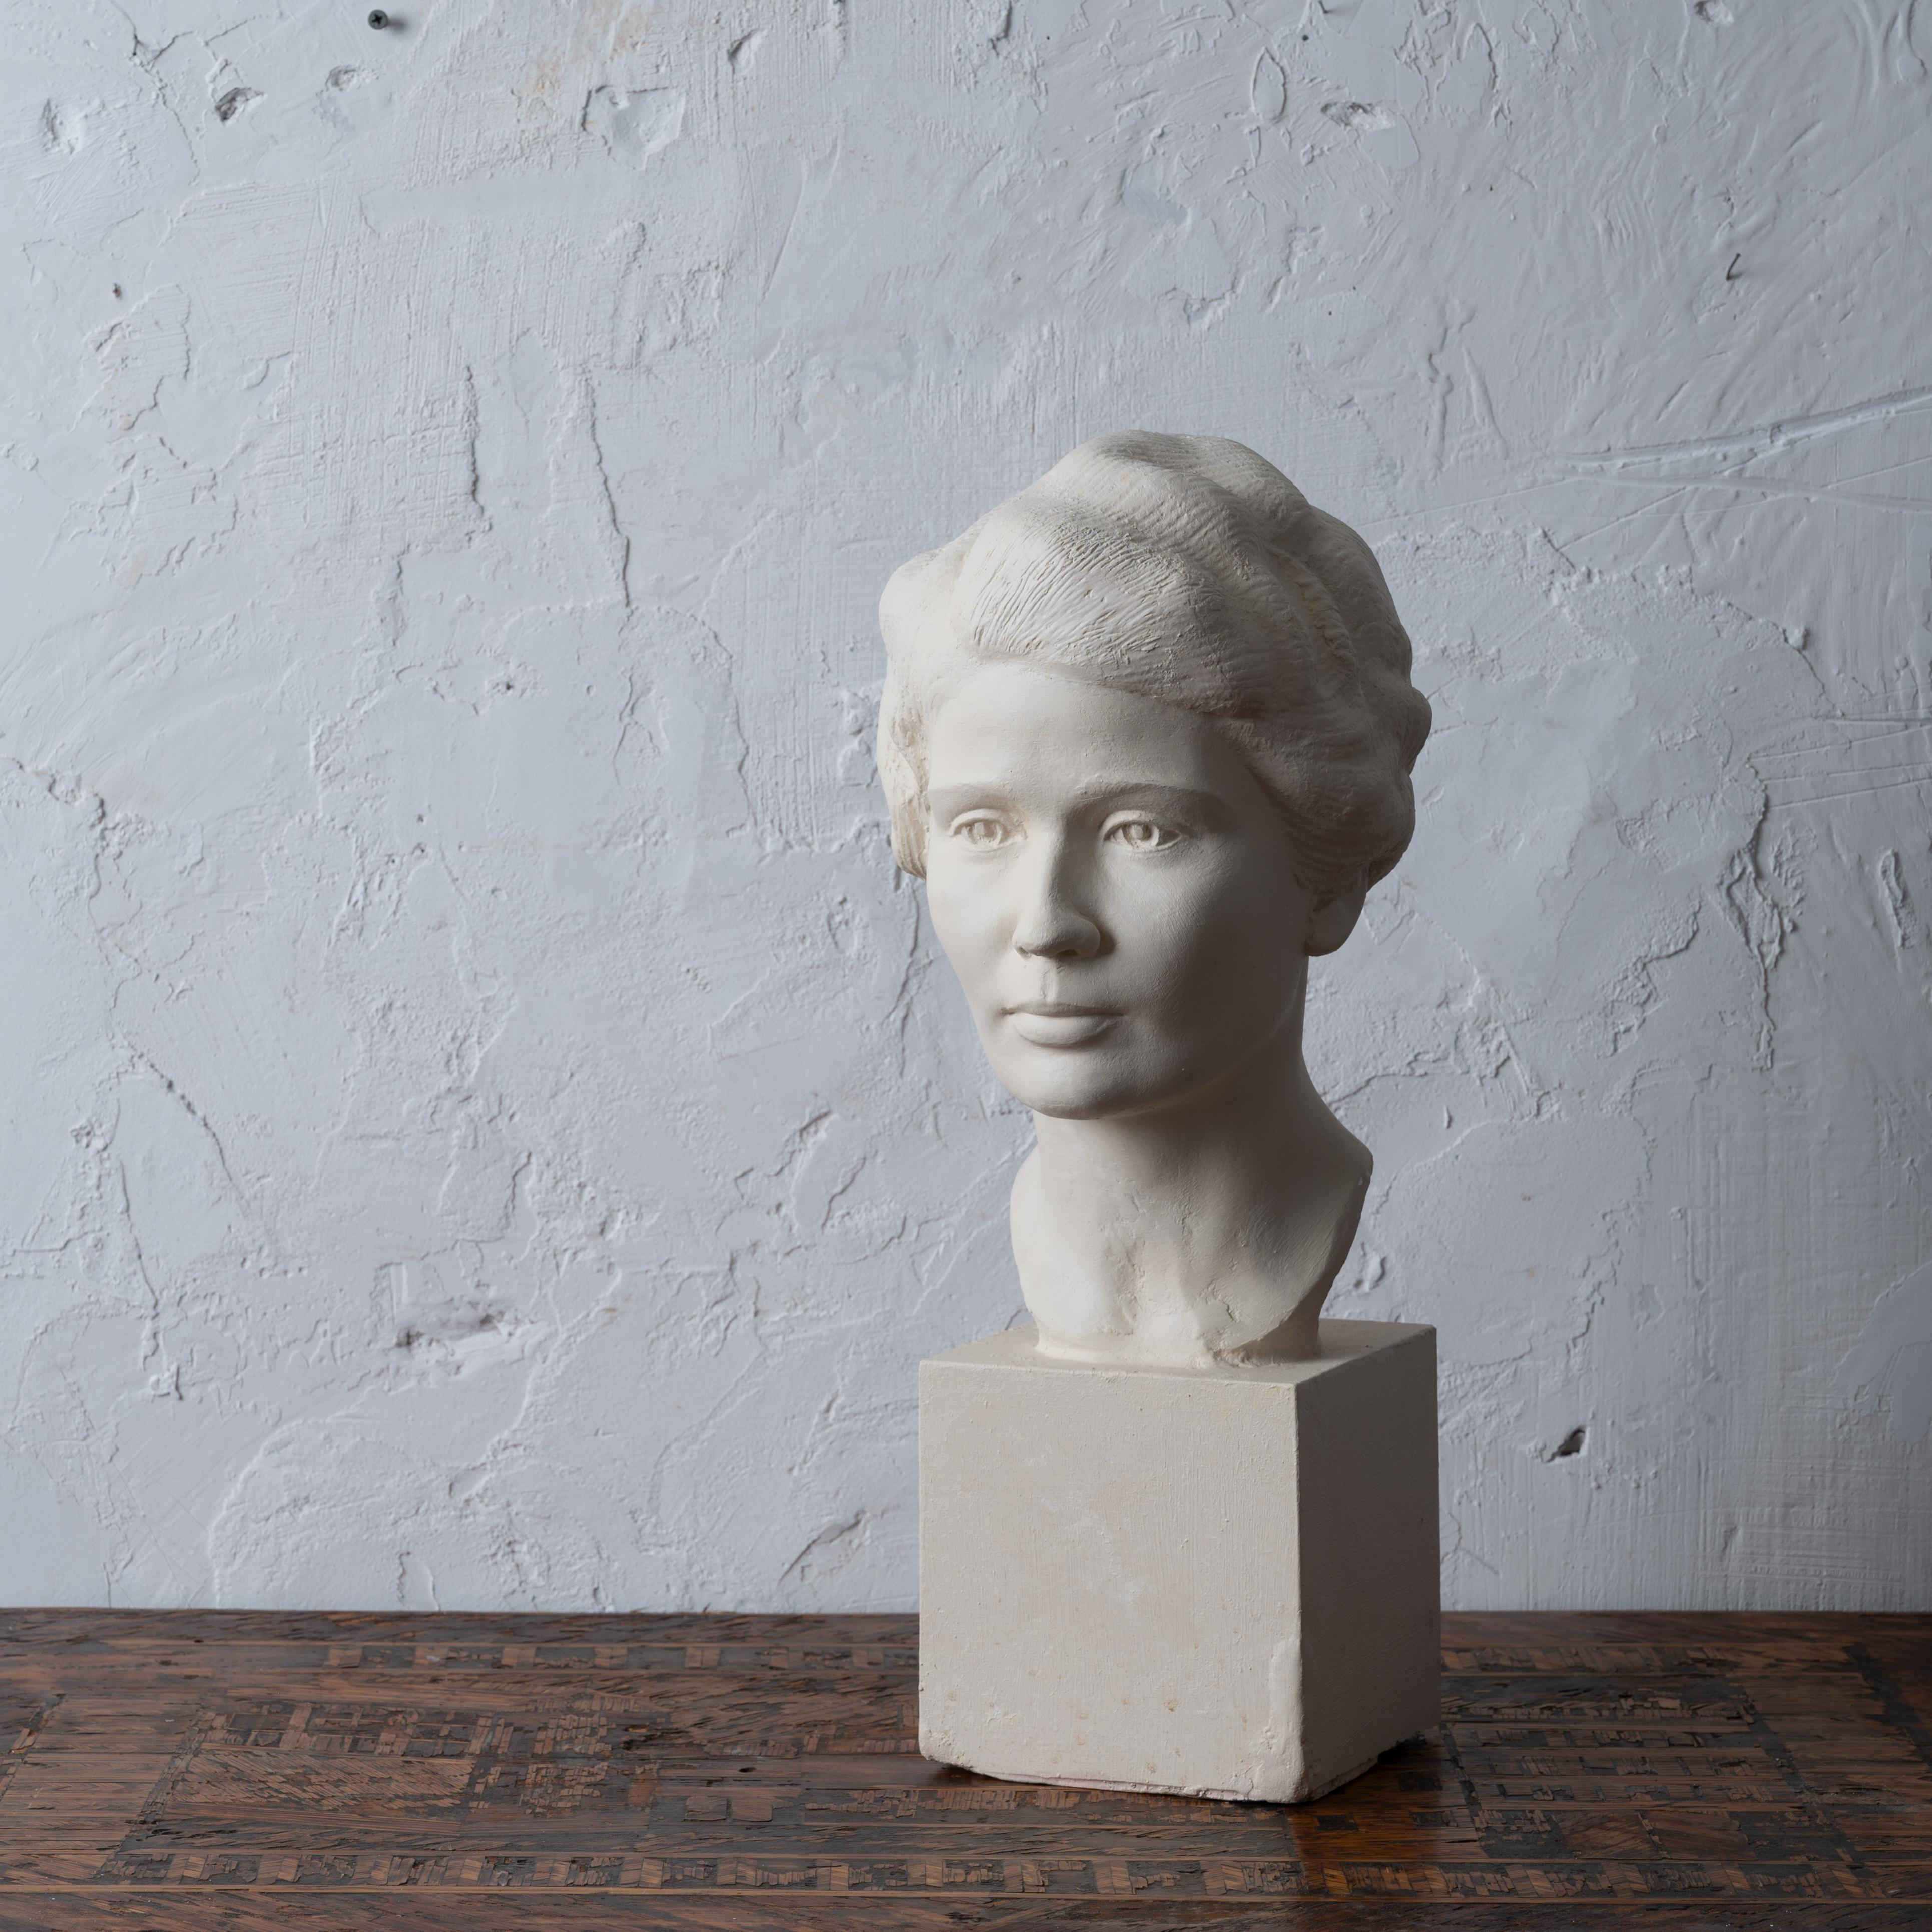 Rosario Russell Fiore
(American, 1908-1994)

A plaster bust of Florence Reeve Fiore, wife of the artist, circa 1930s.
Unsigned.

8 ½ inches wide by 9 ½ inches deep by 20 inches tall

Very good overall condition.

Rosario R. Fiore was a prominent